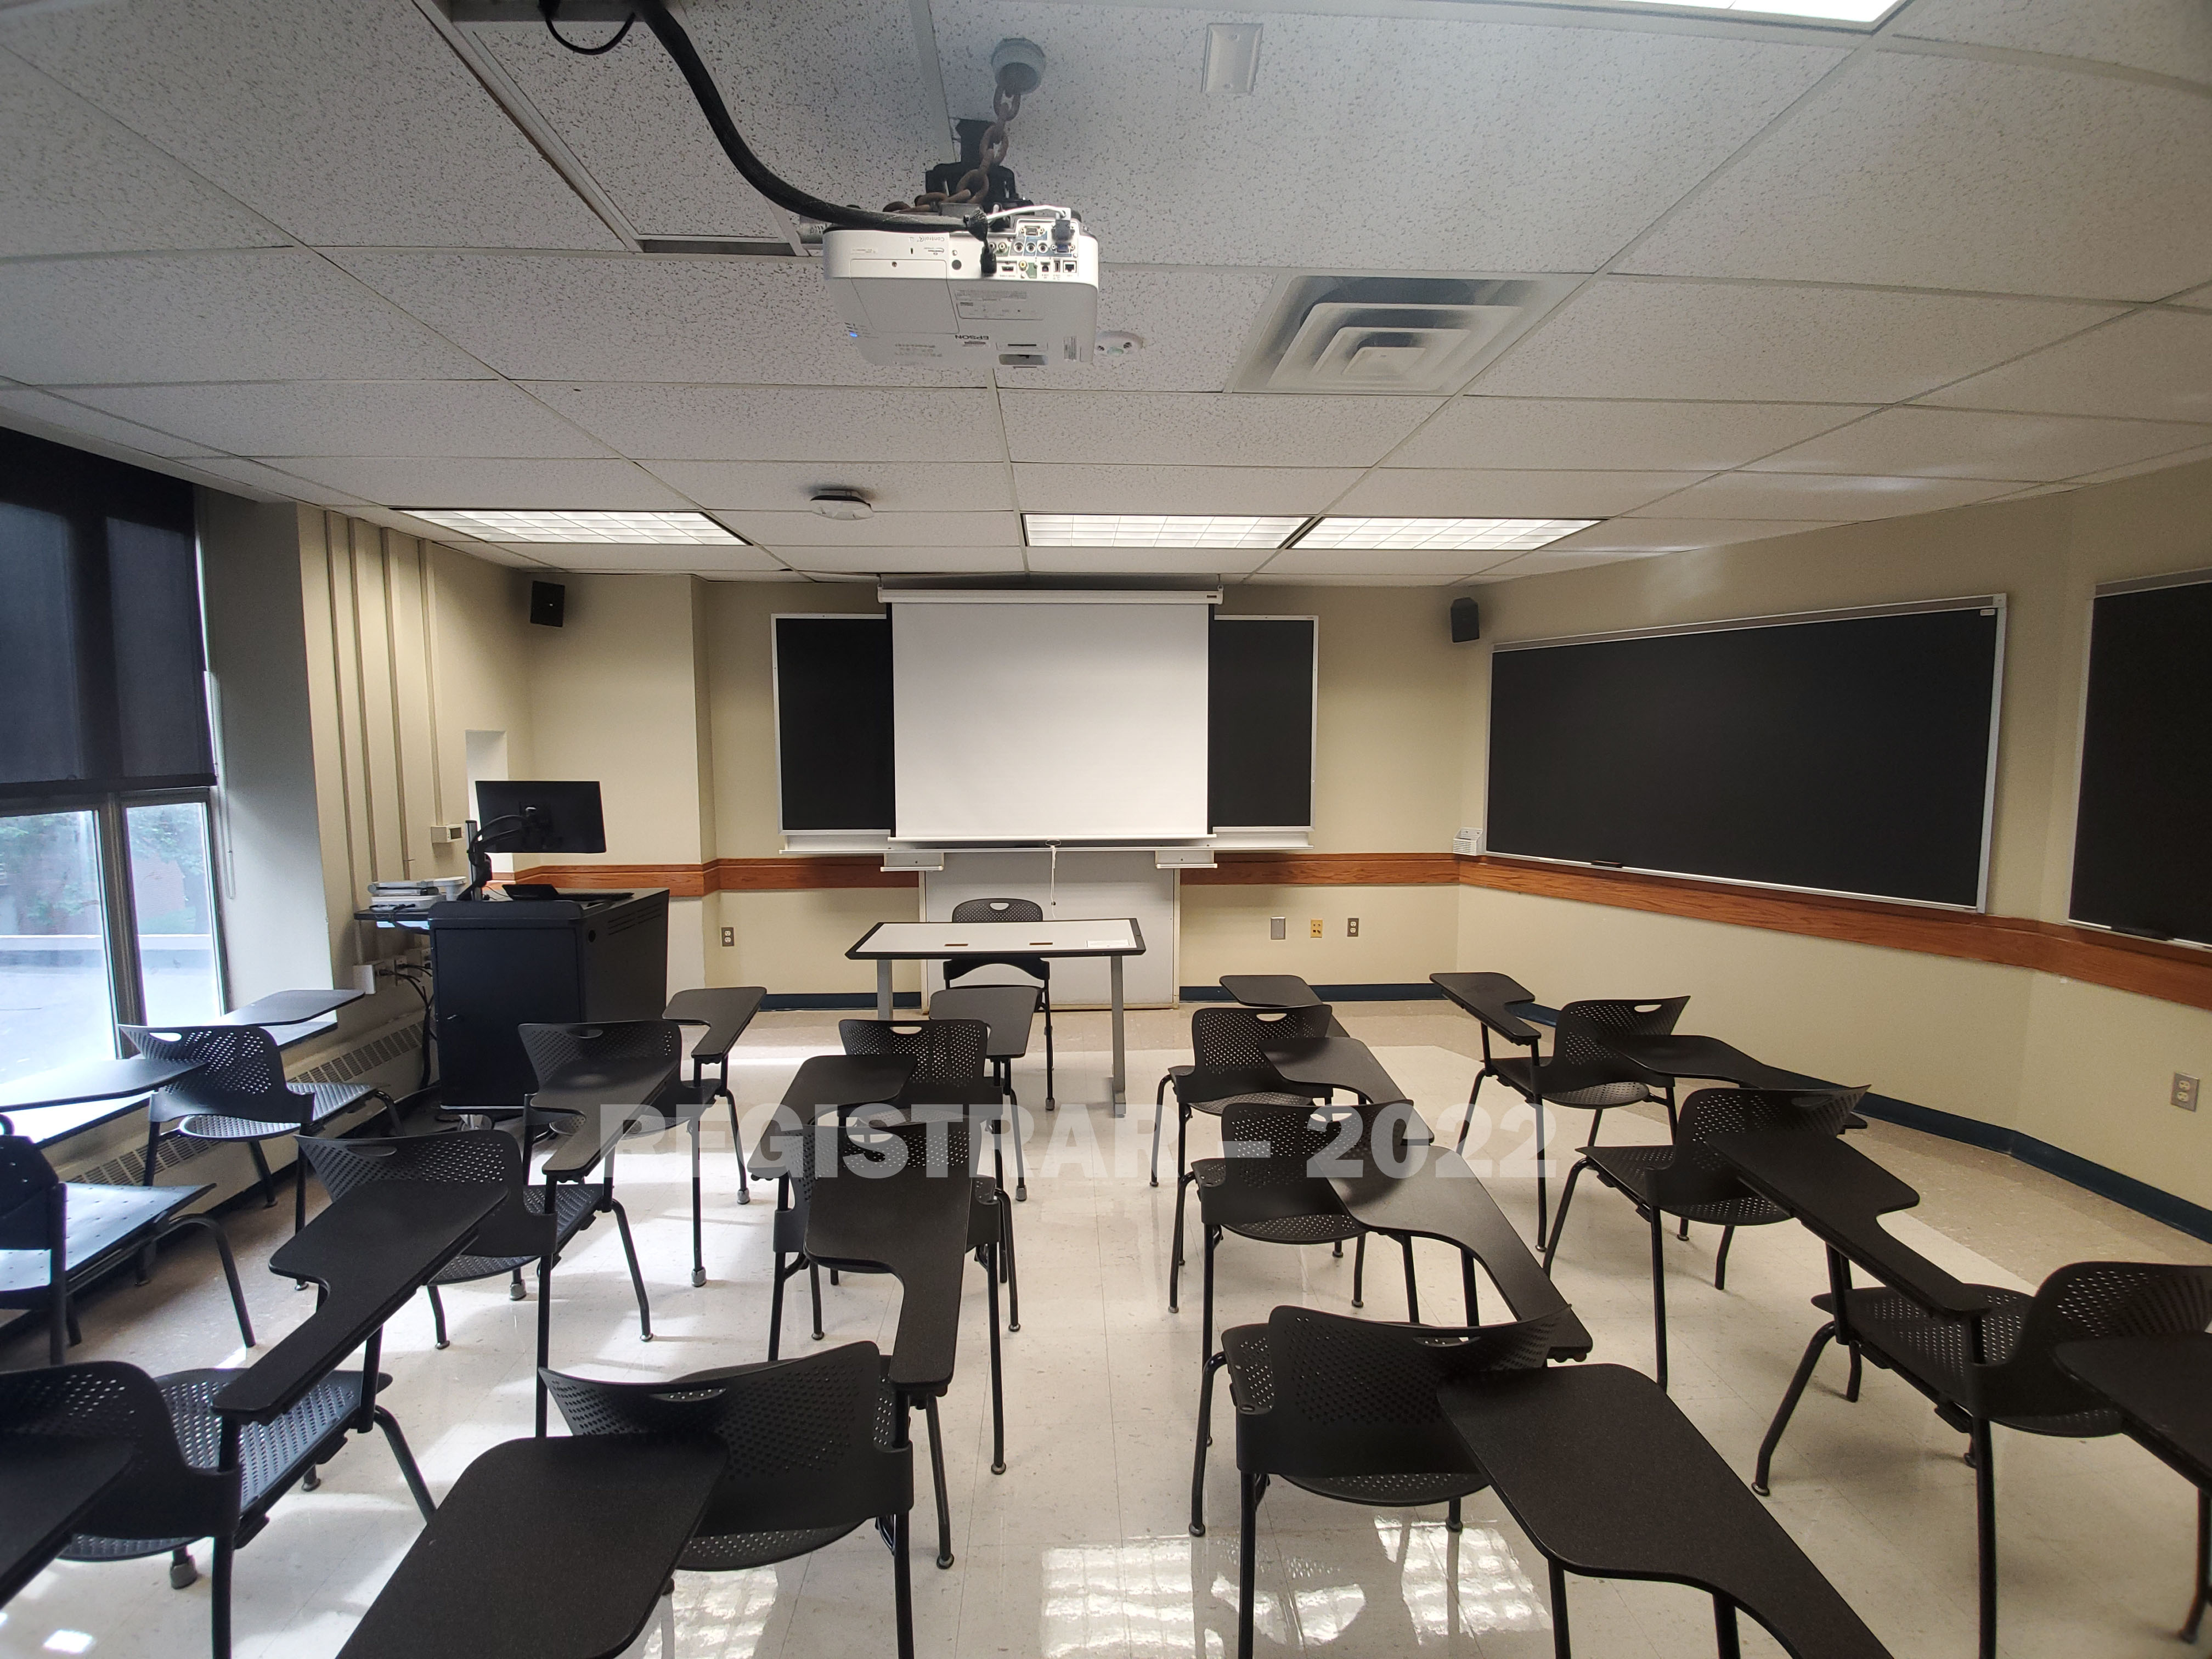 Enarson Classroom Building room 202 ultra wide angle view from the back of the room with projector screen down